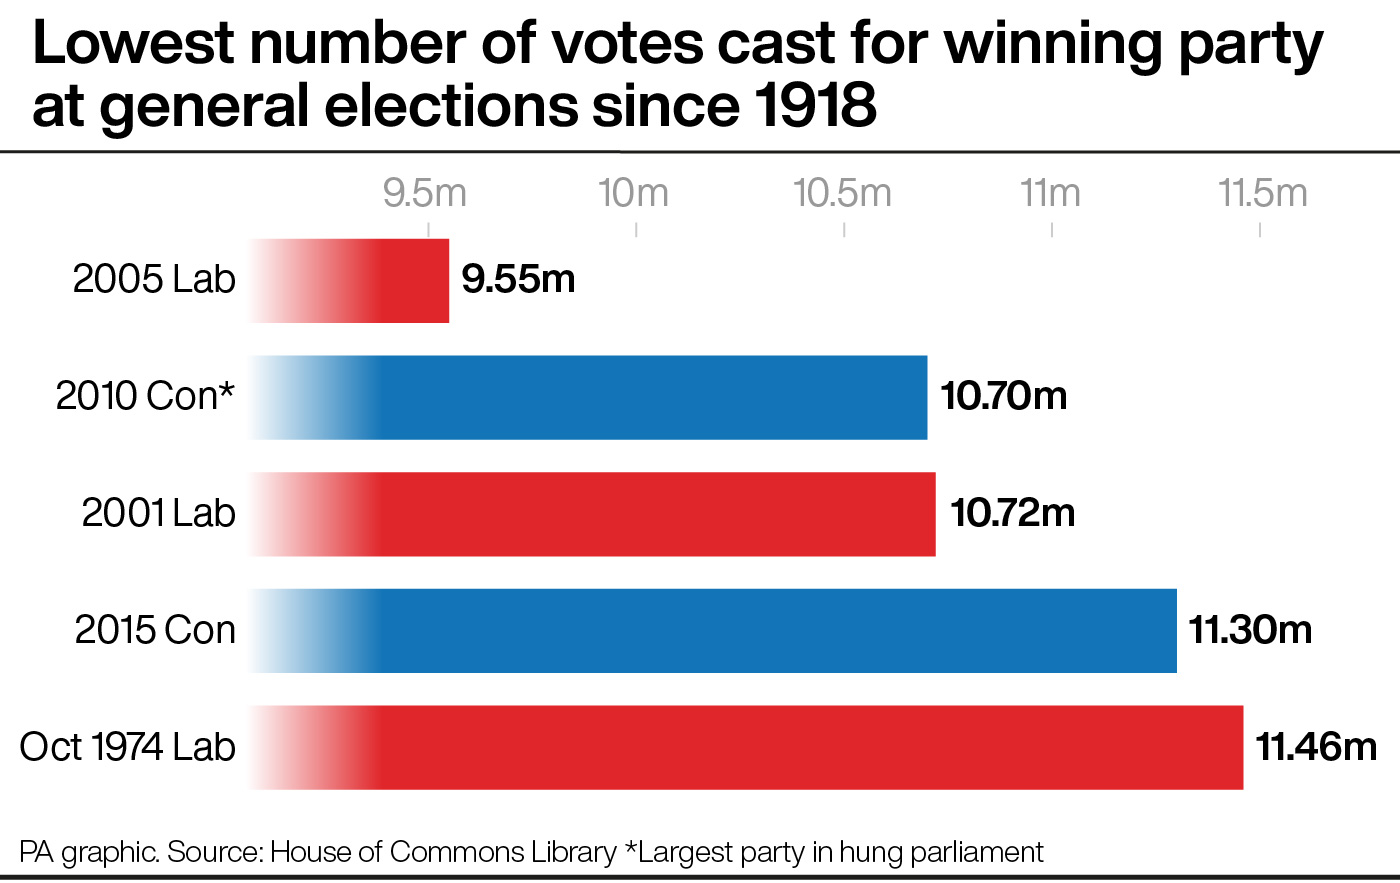 A chart showing the lowest number of votes cast for winning parties at general elections since 1918 